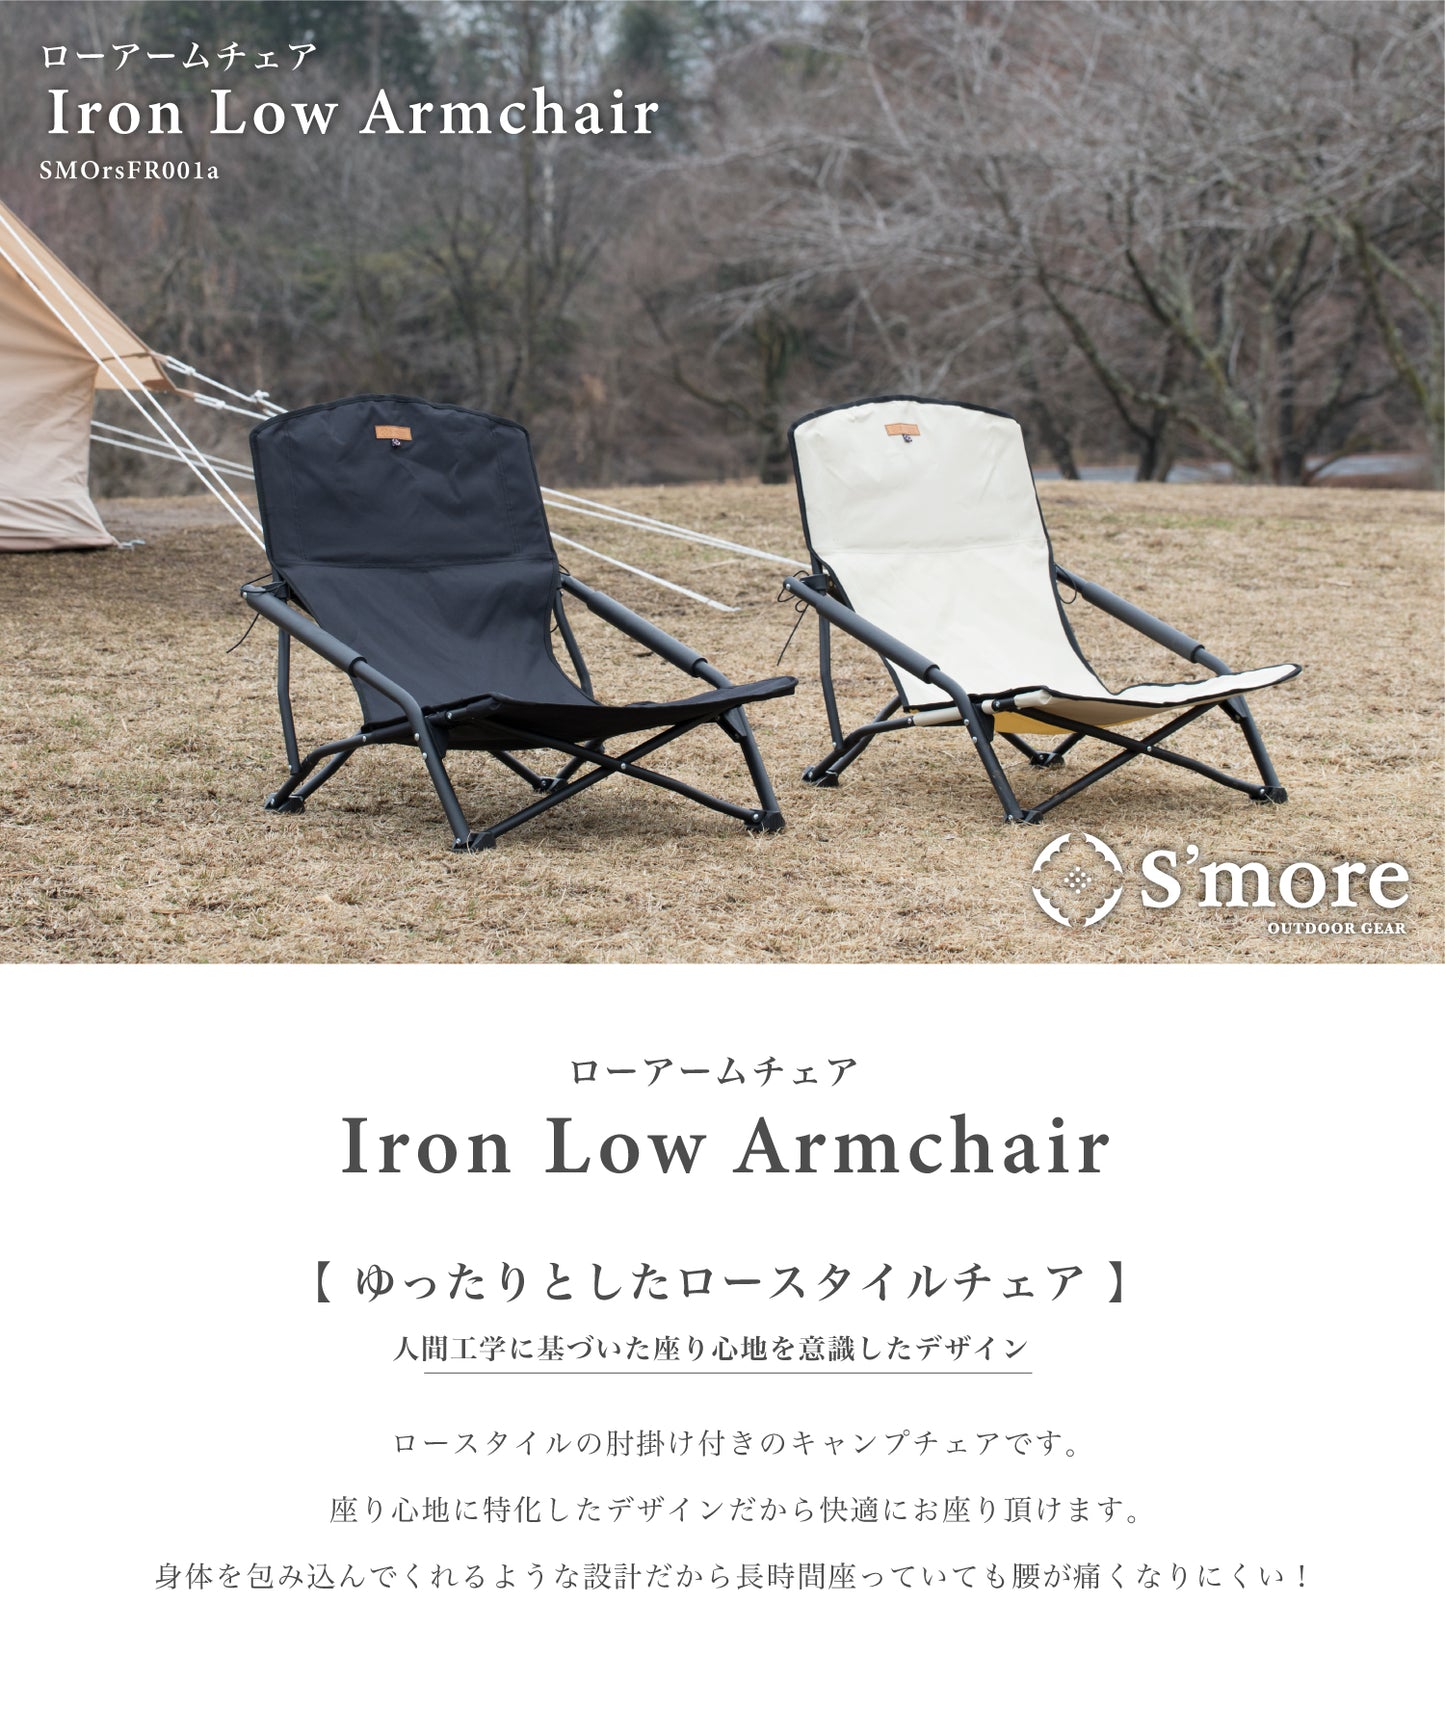 【 Iron Low Armchair】アイアンローアームチェア ゆったり座り心地のアイアンチェア